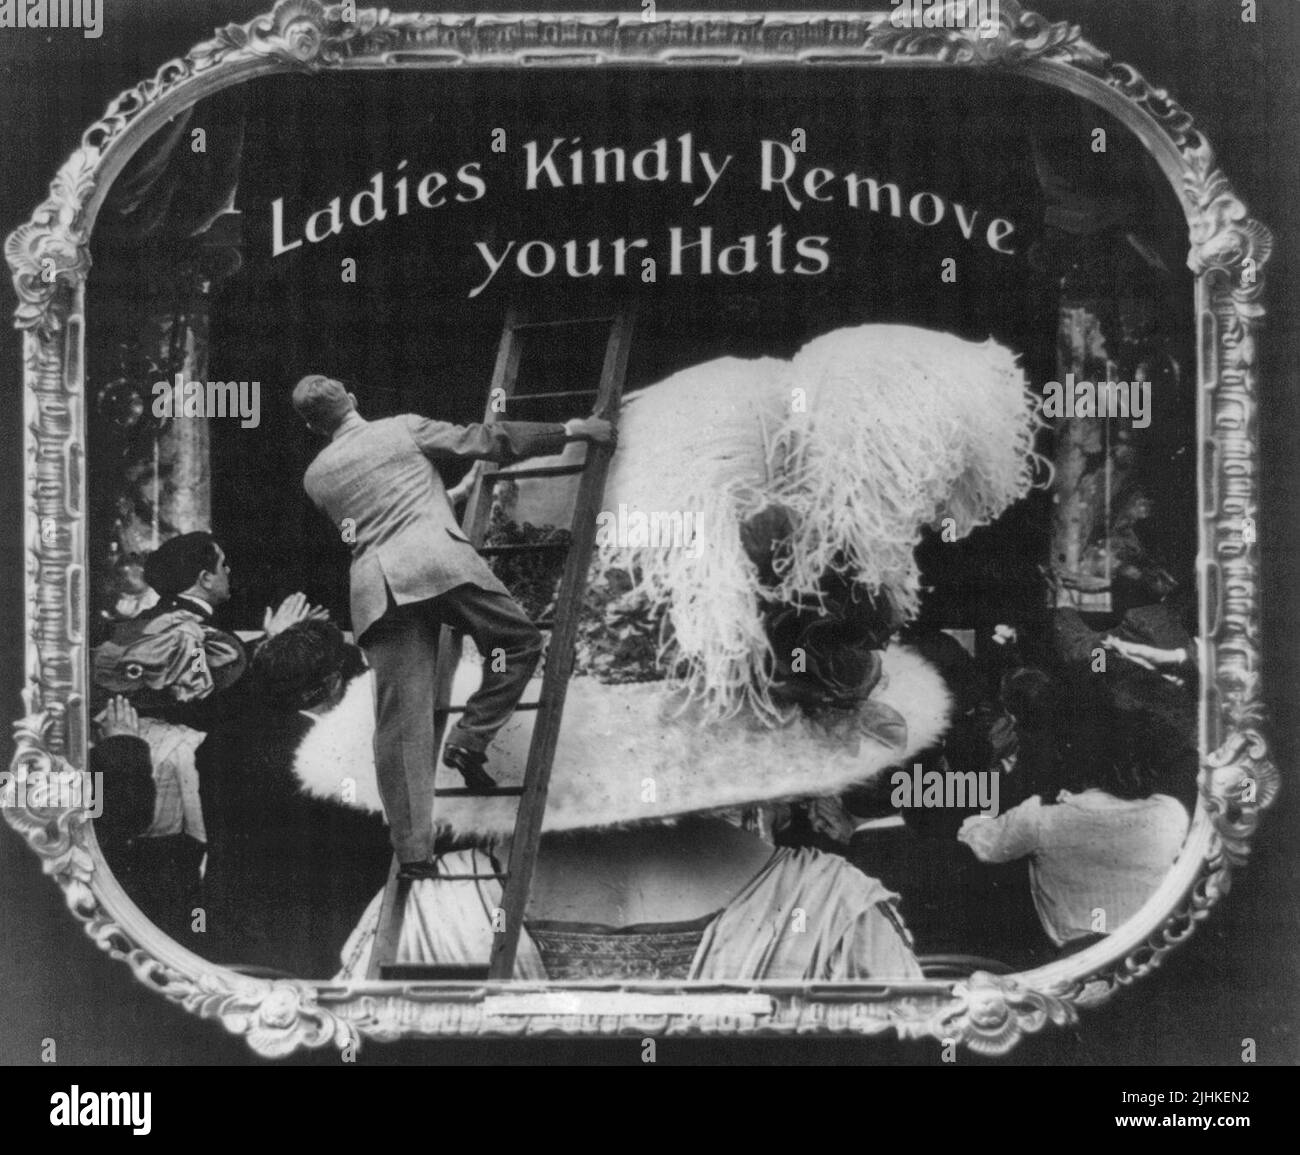 Ladies kindly remove your hats. Positive paper print from lantern slide used in motion picture theaters as announcement Stock Photo